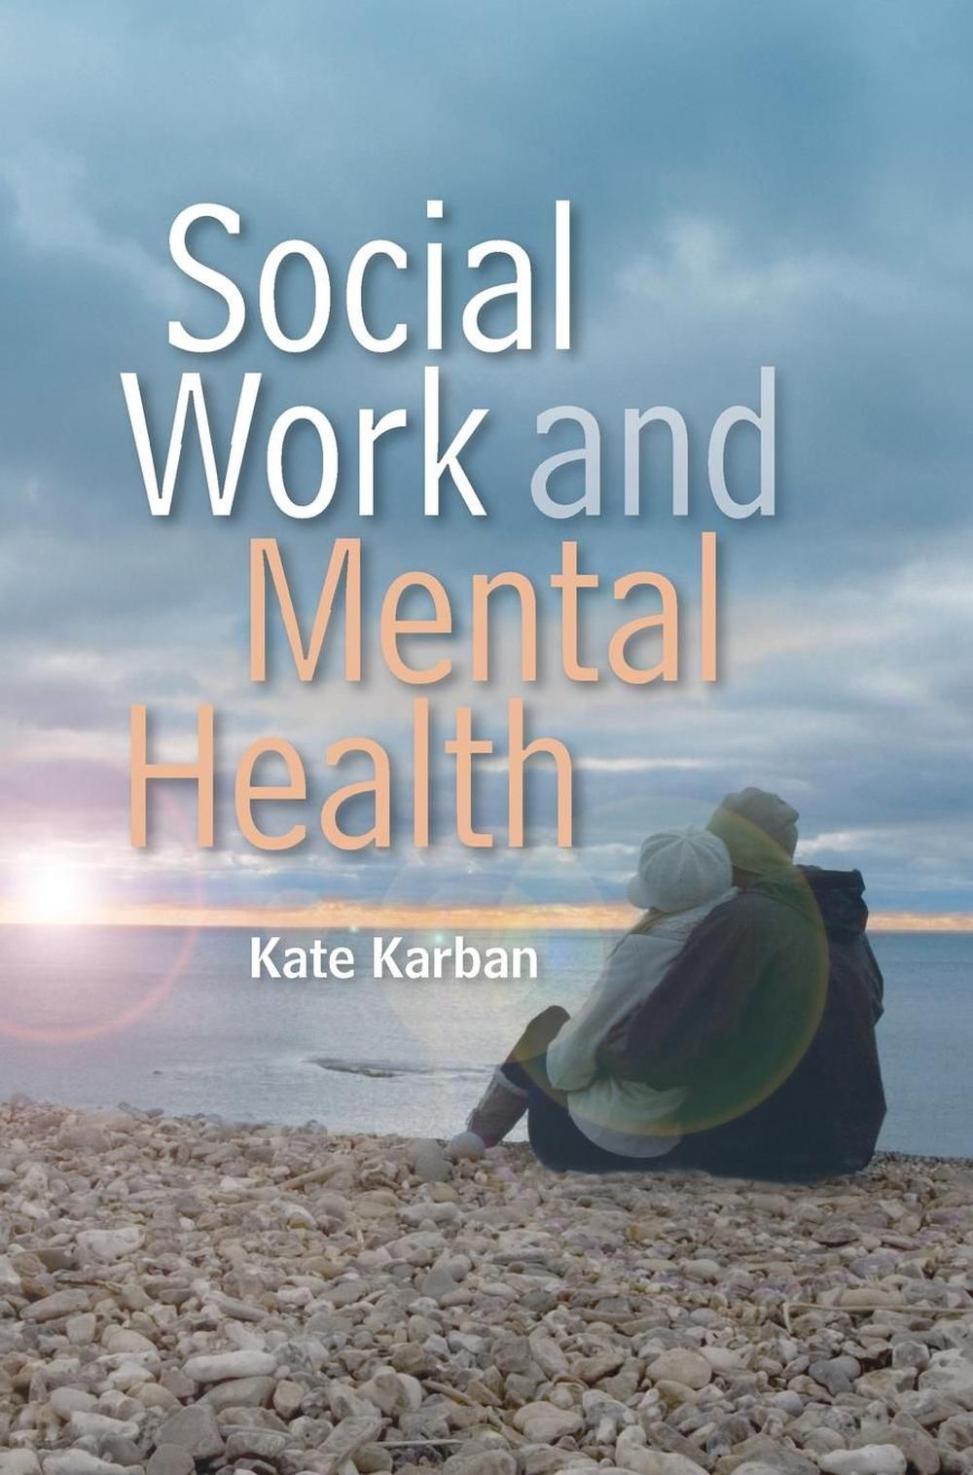 How Can Social Workers Use Book Reviews to Advocate for Social Change and Raise Awareness of Important Issues?